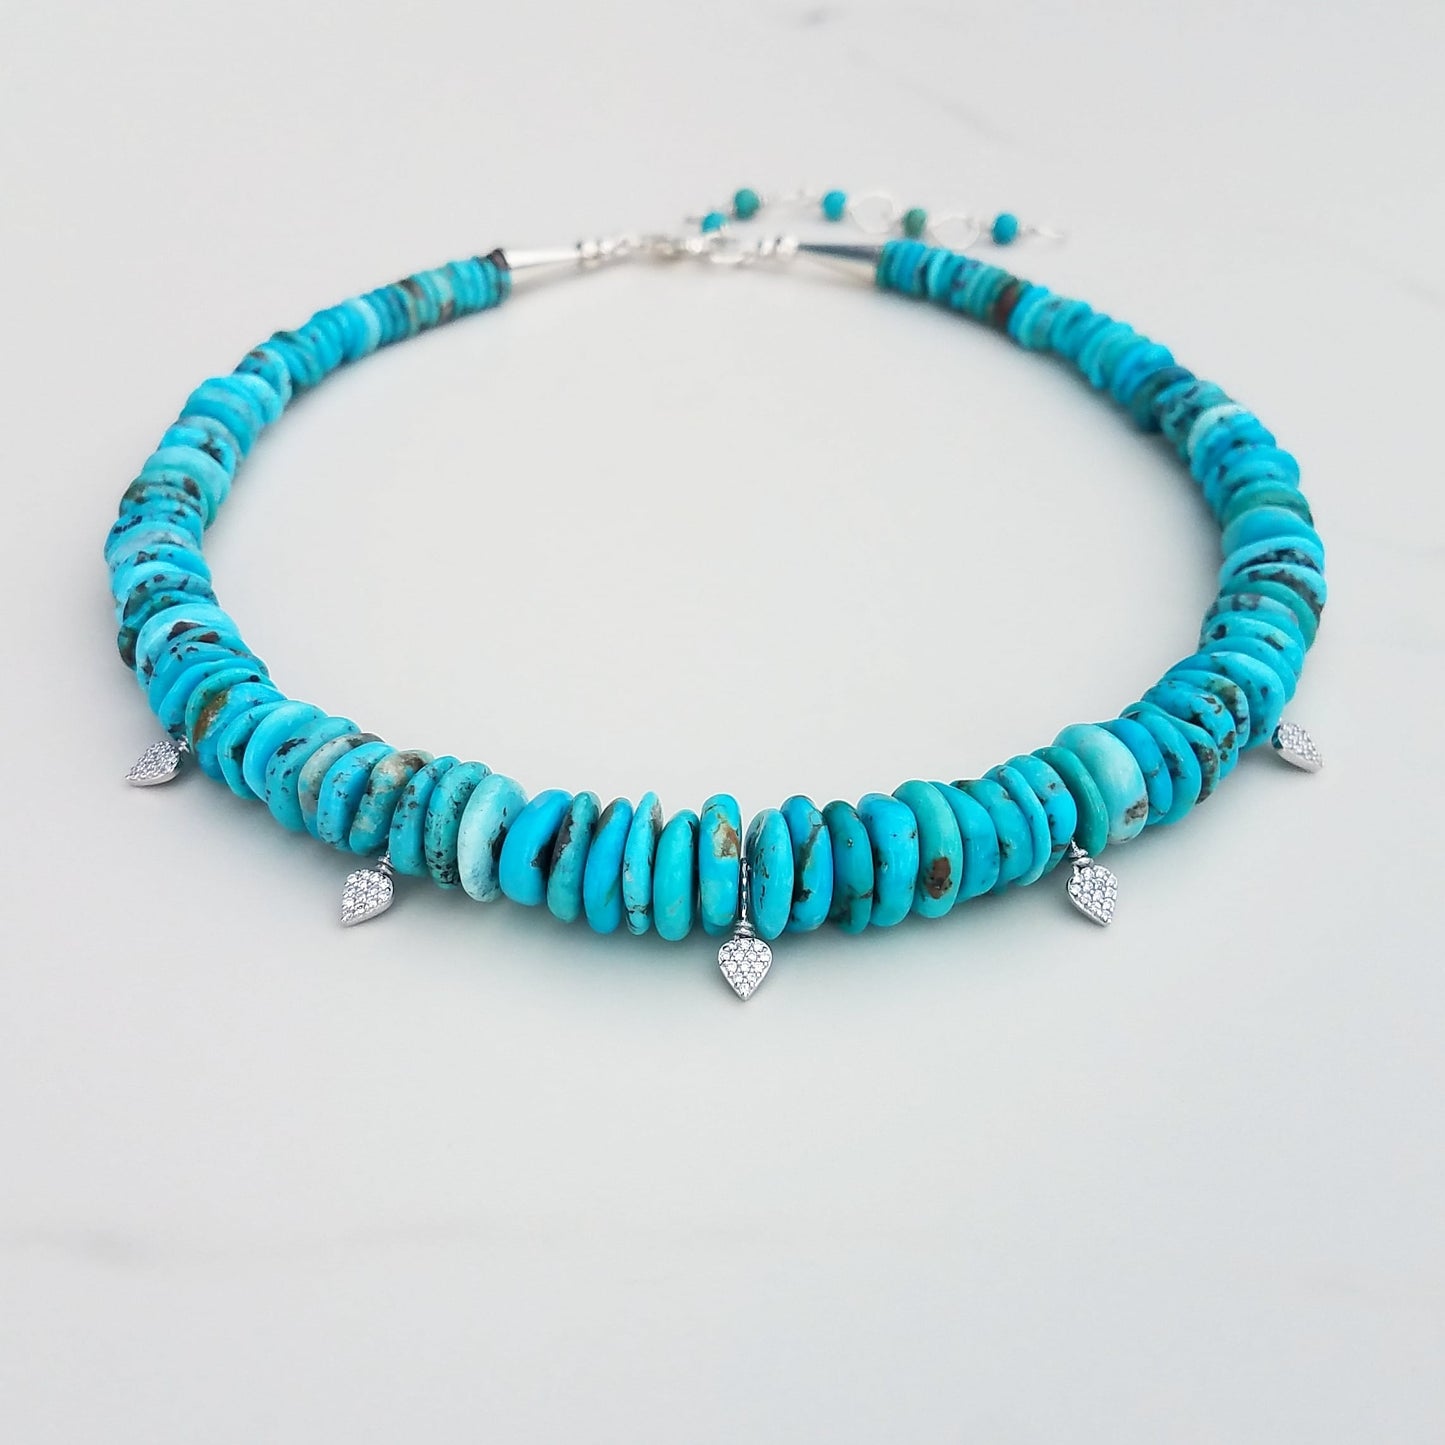 Turquoise Disc Necklace